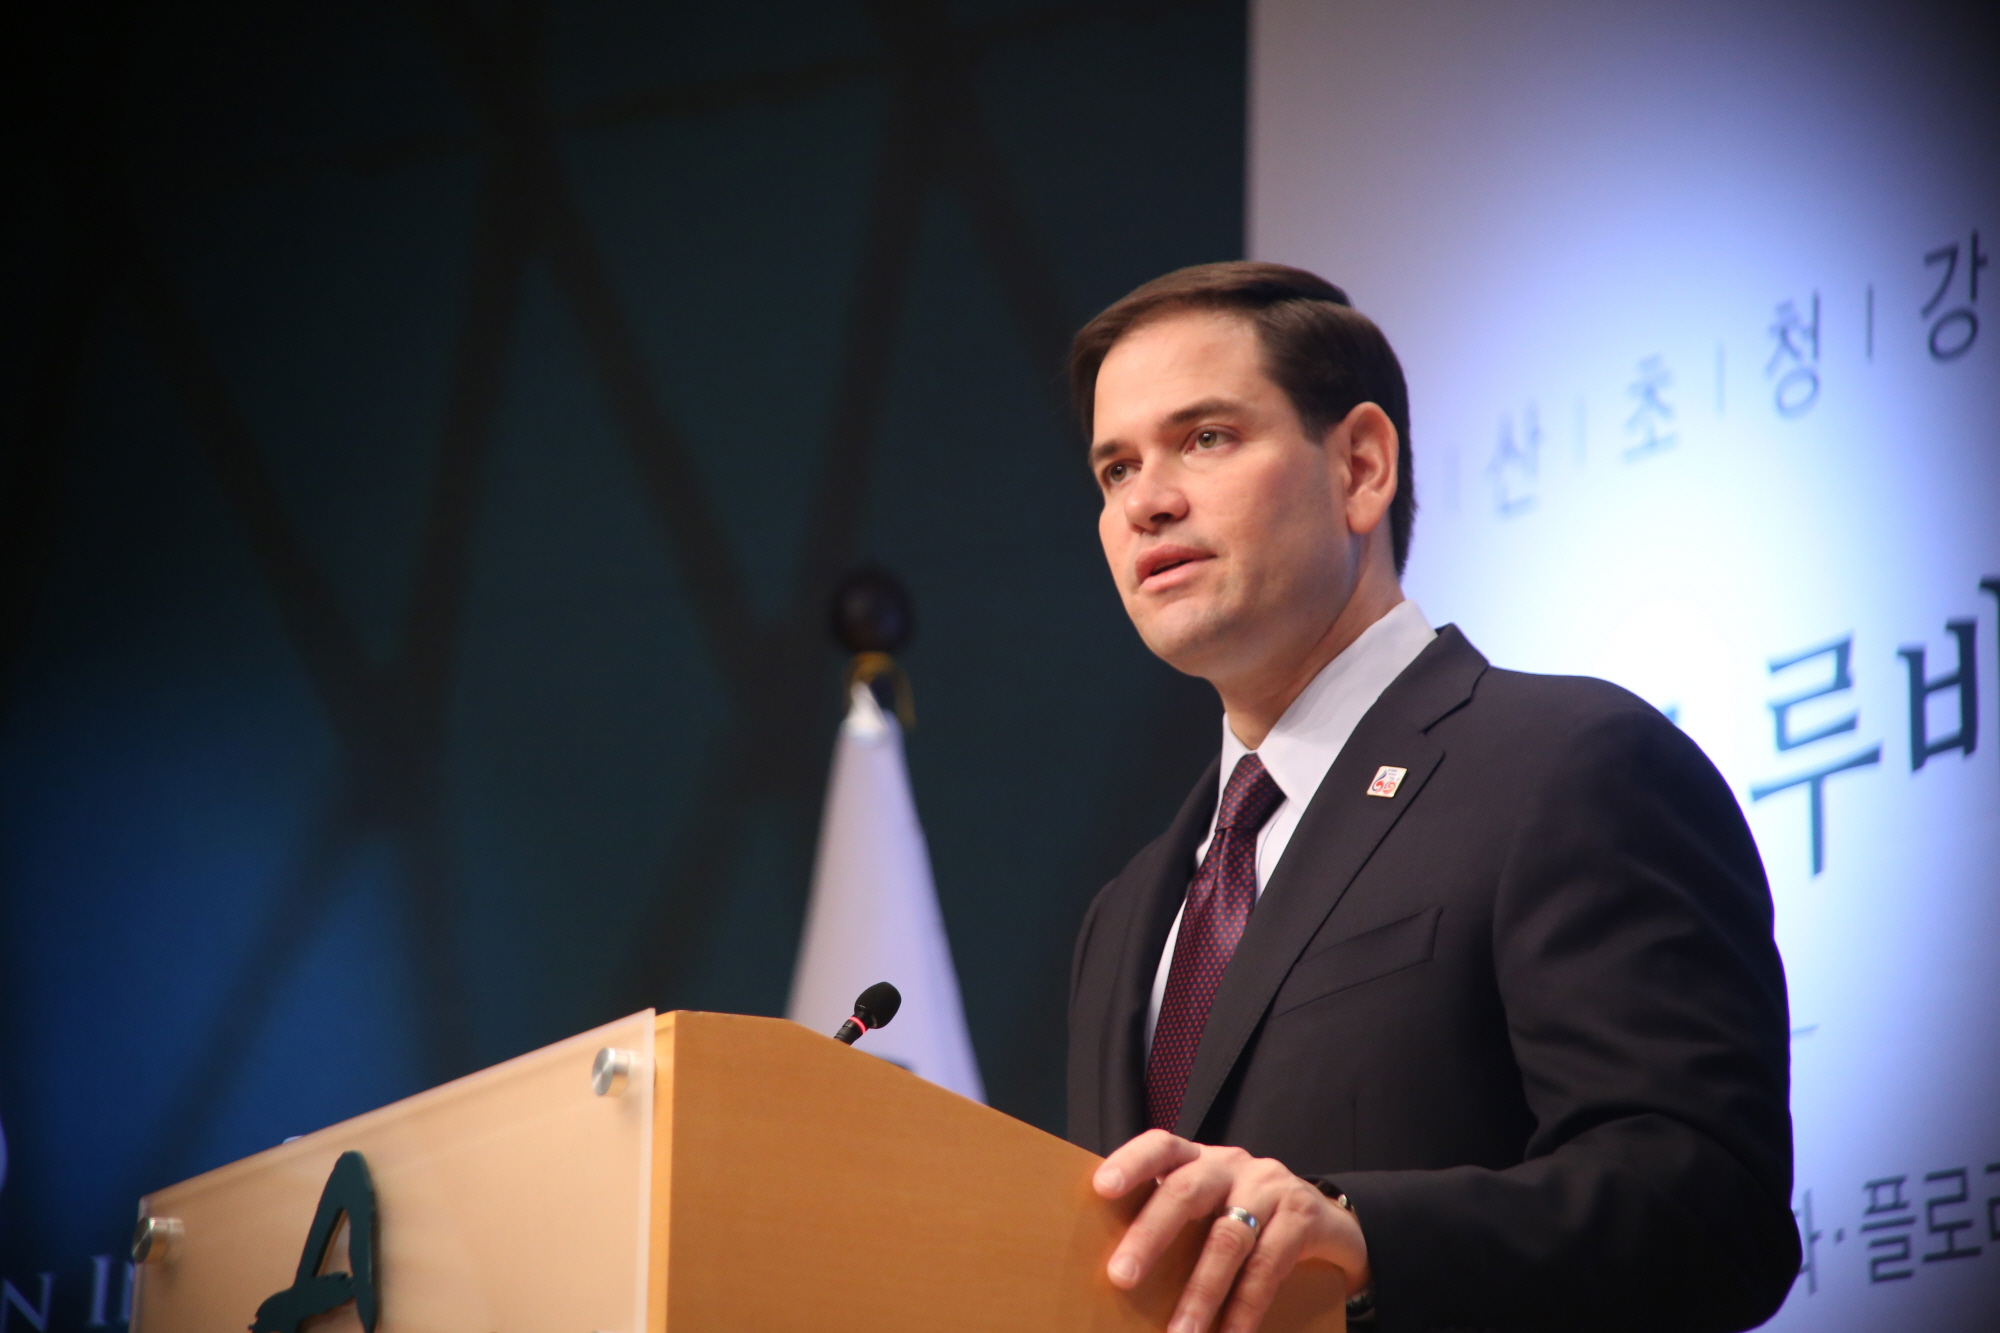 A conversation with Marco Rubio1